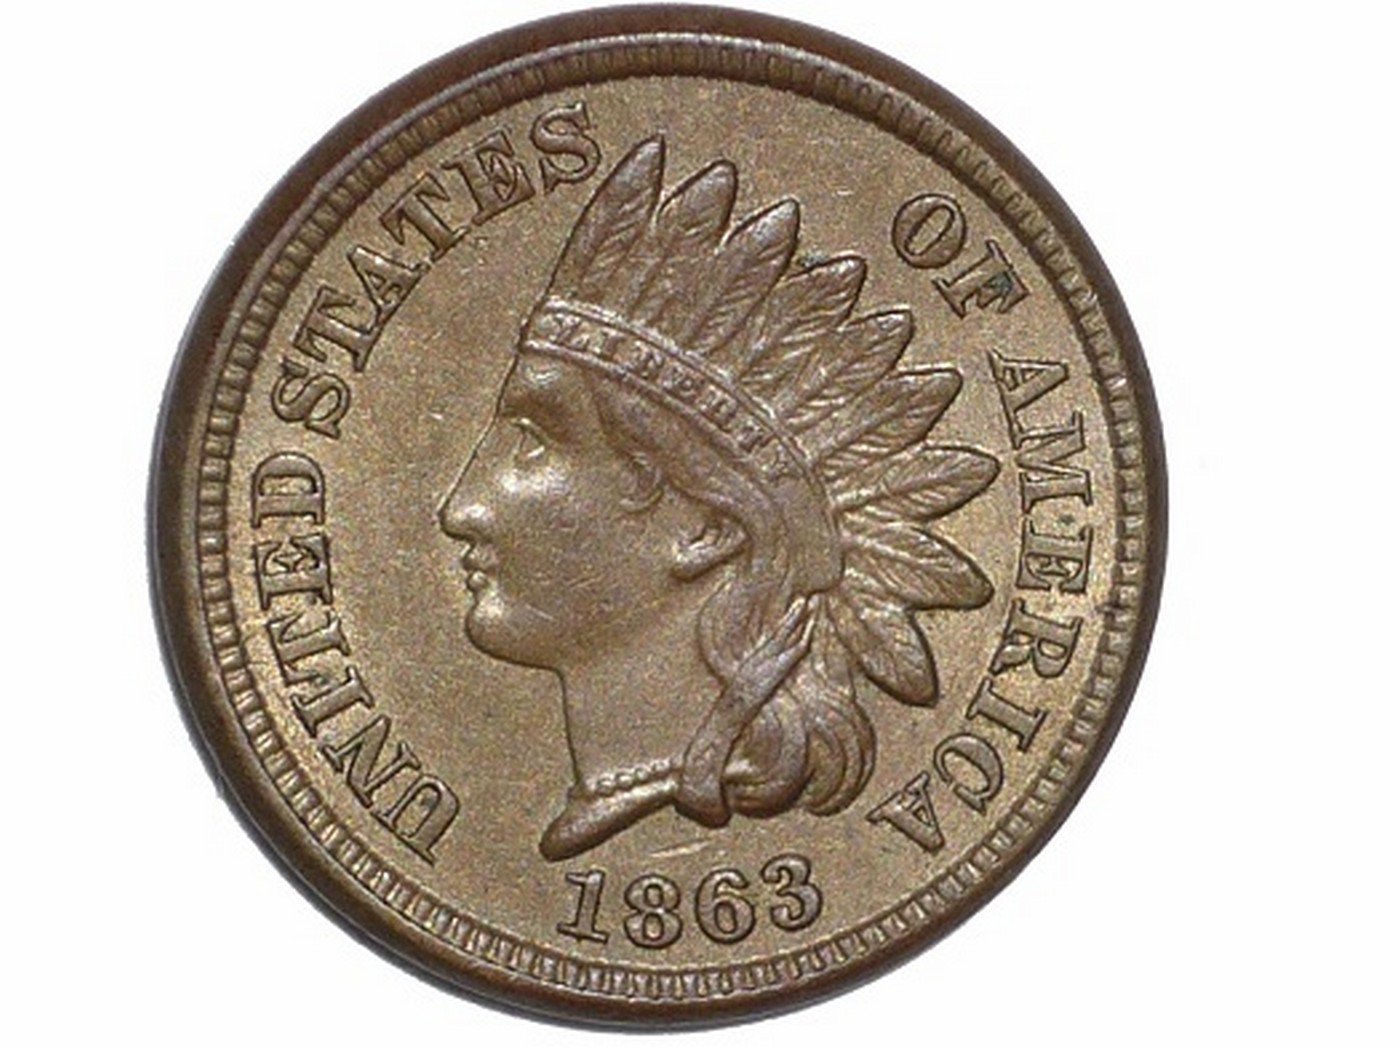 1863 Obverse of ODD-008, CUD-019 - Indian Head Penny - Photo by David Poliquin